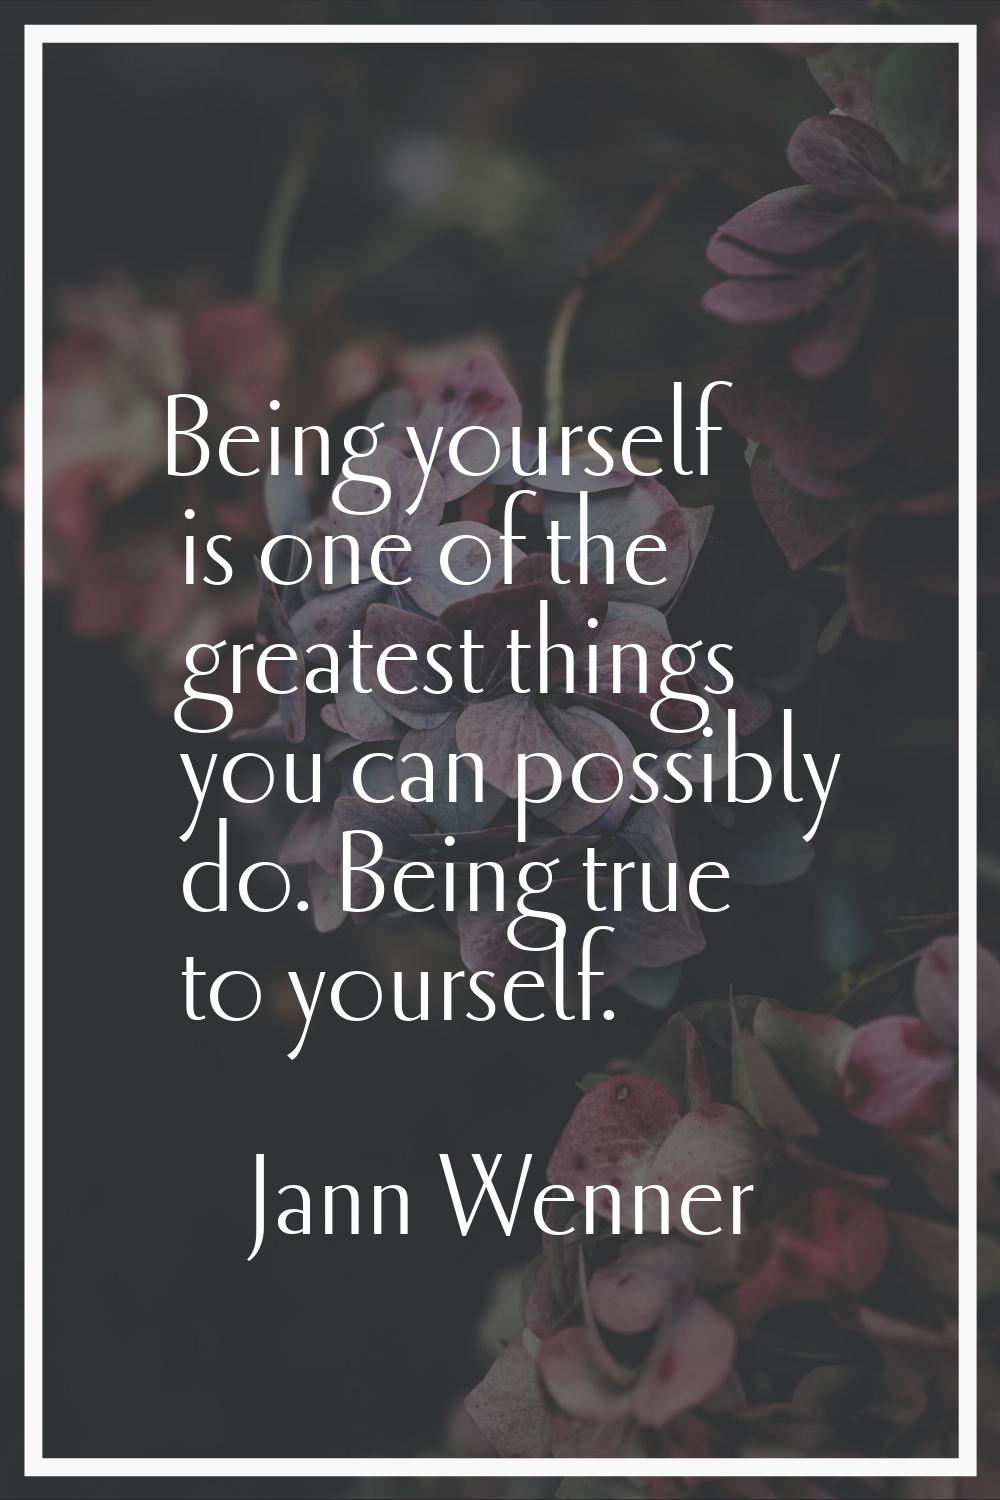 Being yourself is one of the greatest things you can possibly do. Being true to yourself.